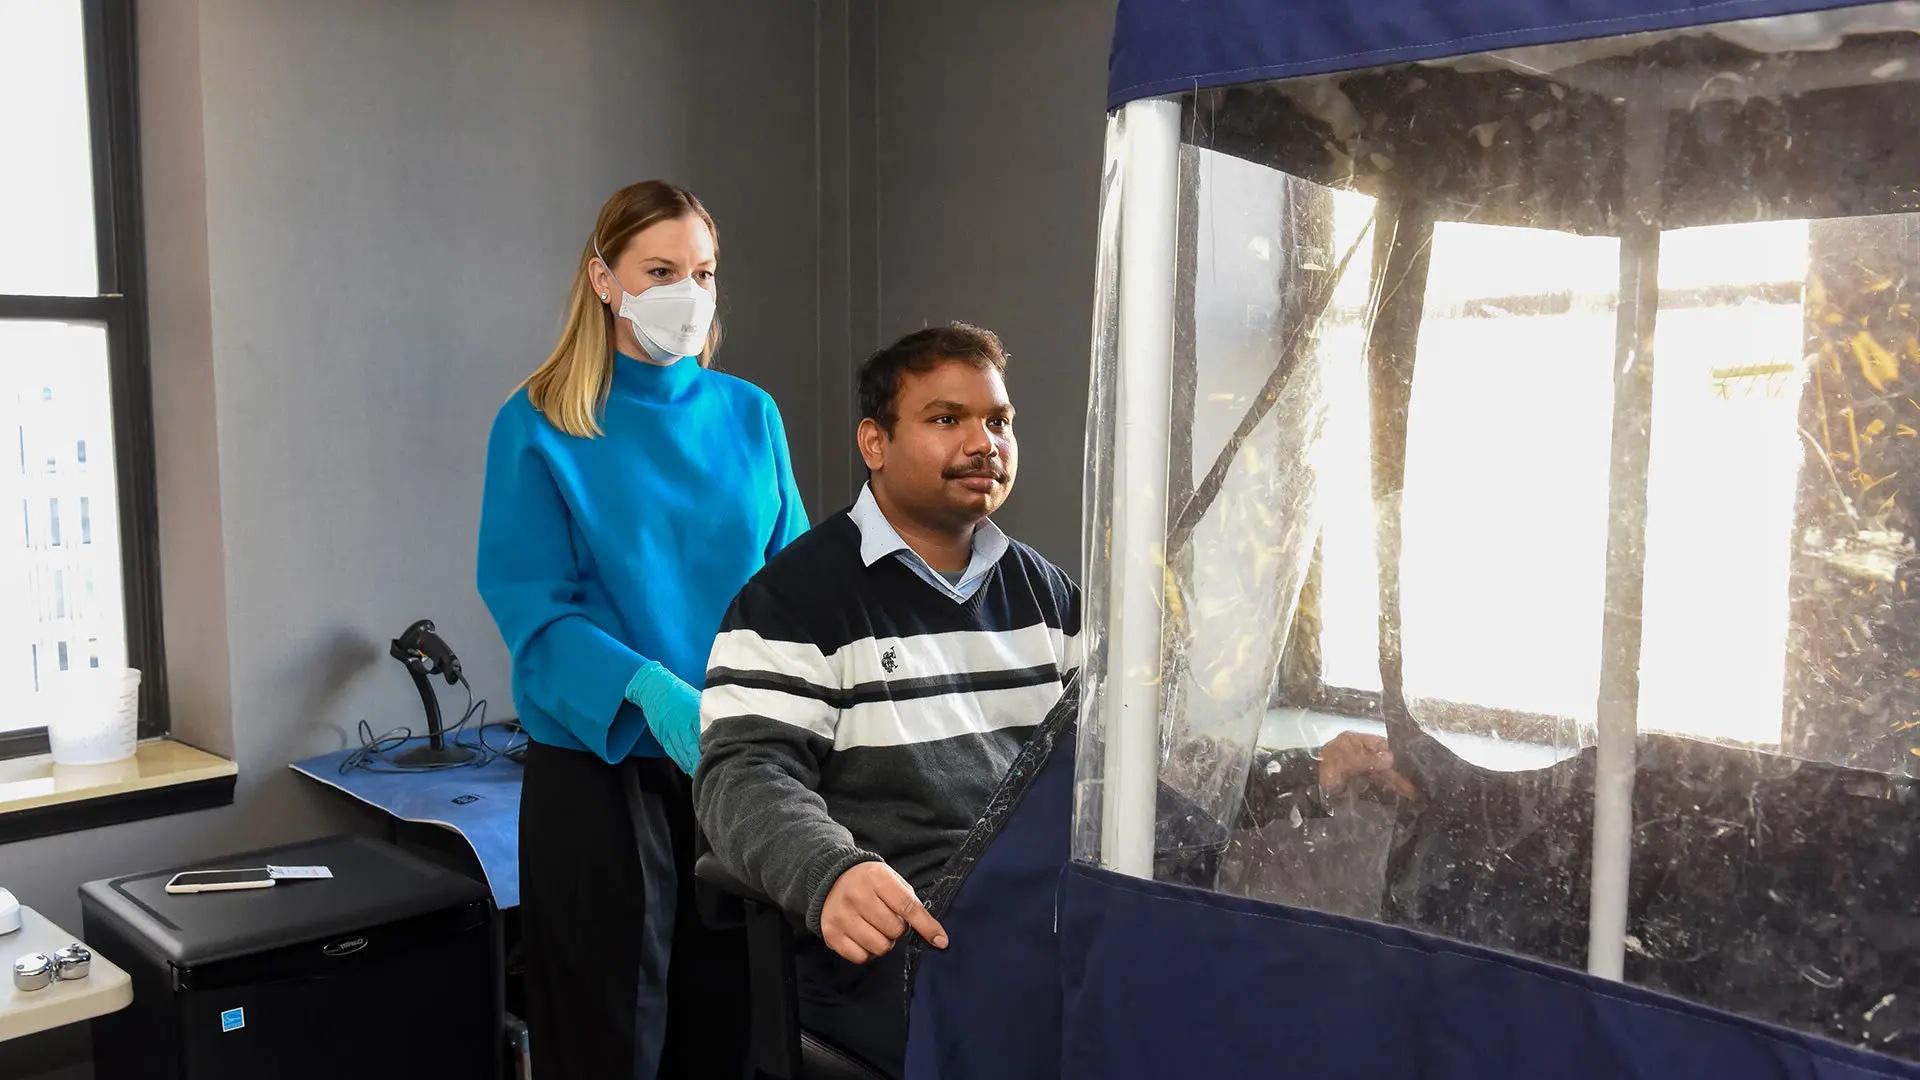 With the help of a Assistant Professor Kristen Coleman of the Maryland Institute for Applied Environmental Health, UMD Faculty Research Associate Aditya Srikakulapu enters a breath sampling station as part of the preparations for a groundbreaking study of flu transmission taking place at a hotel in Baltimore. Photo by Tom Jemski, UMSOM Public Affairs